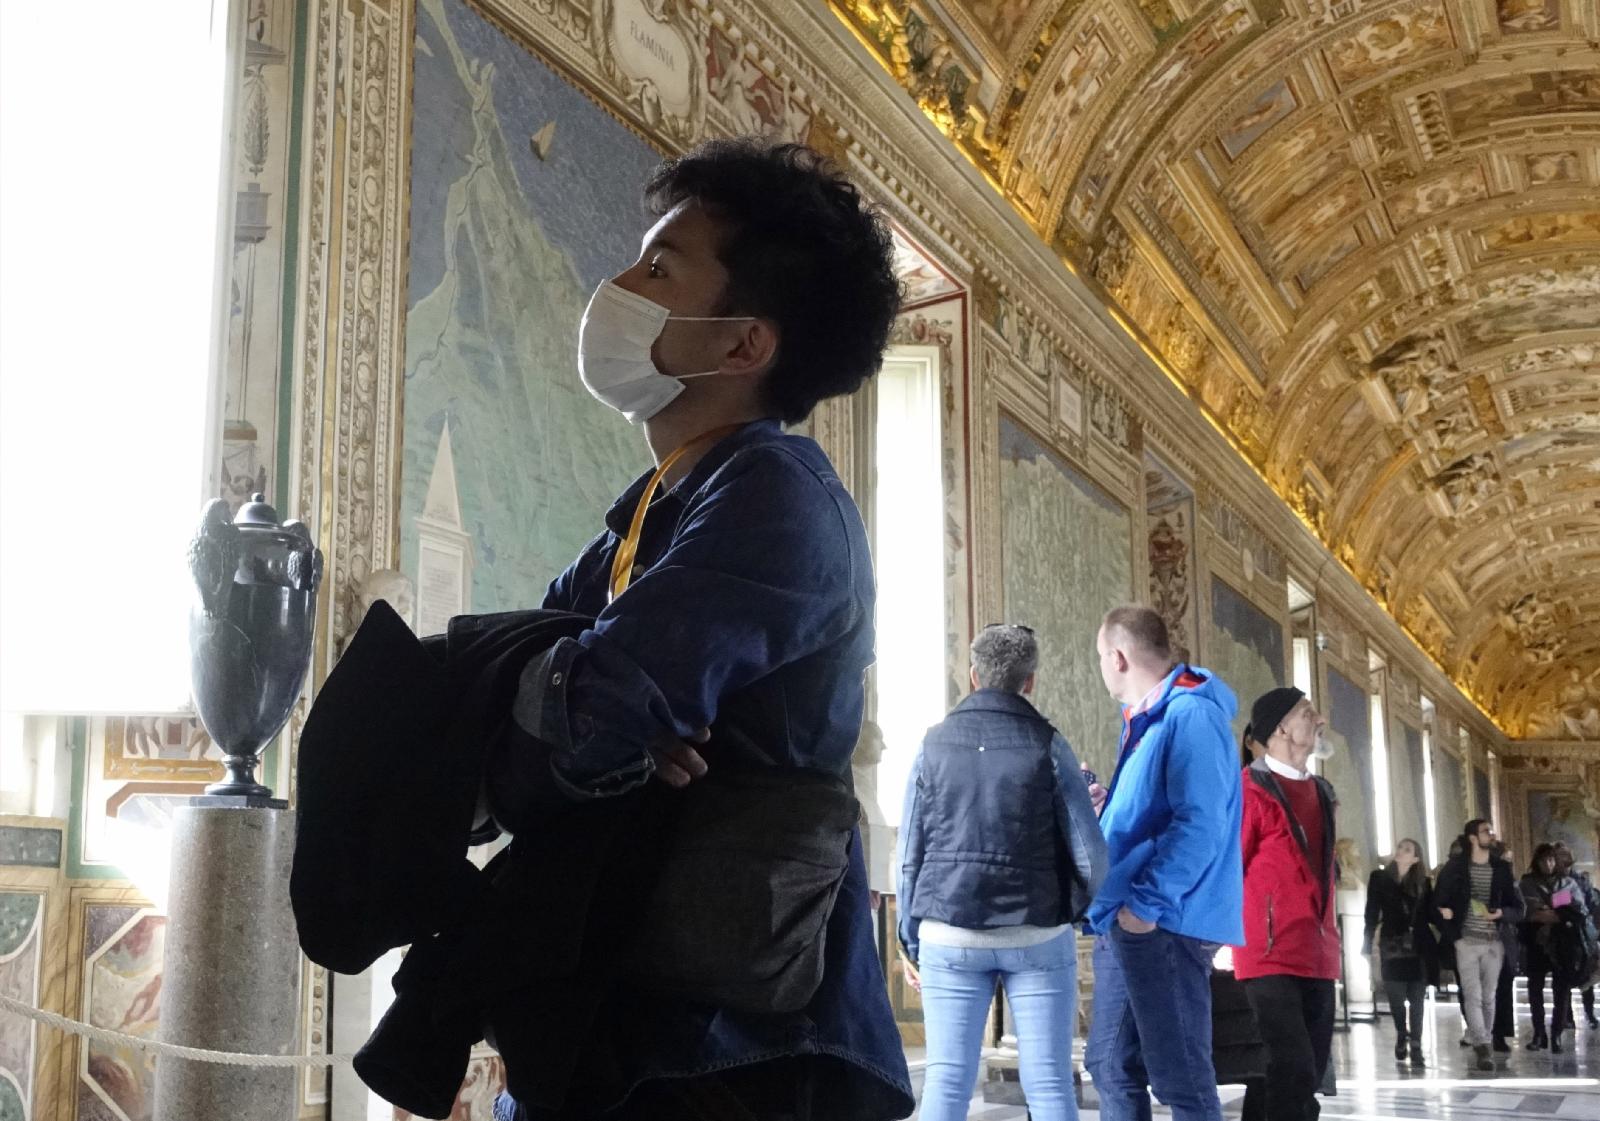 The grand reopening of Vatican Museums after lockdown